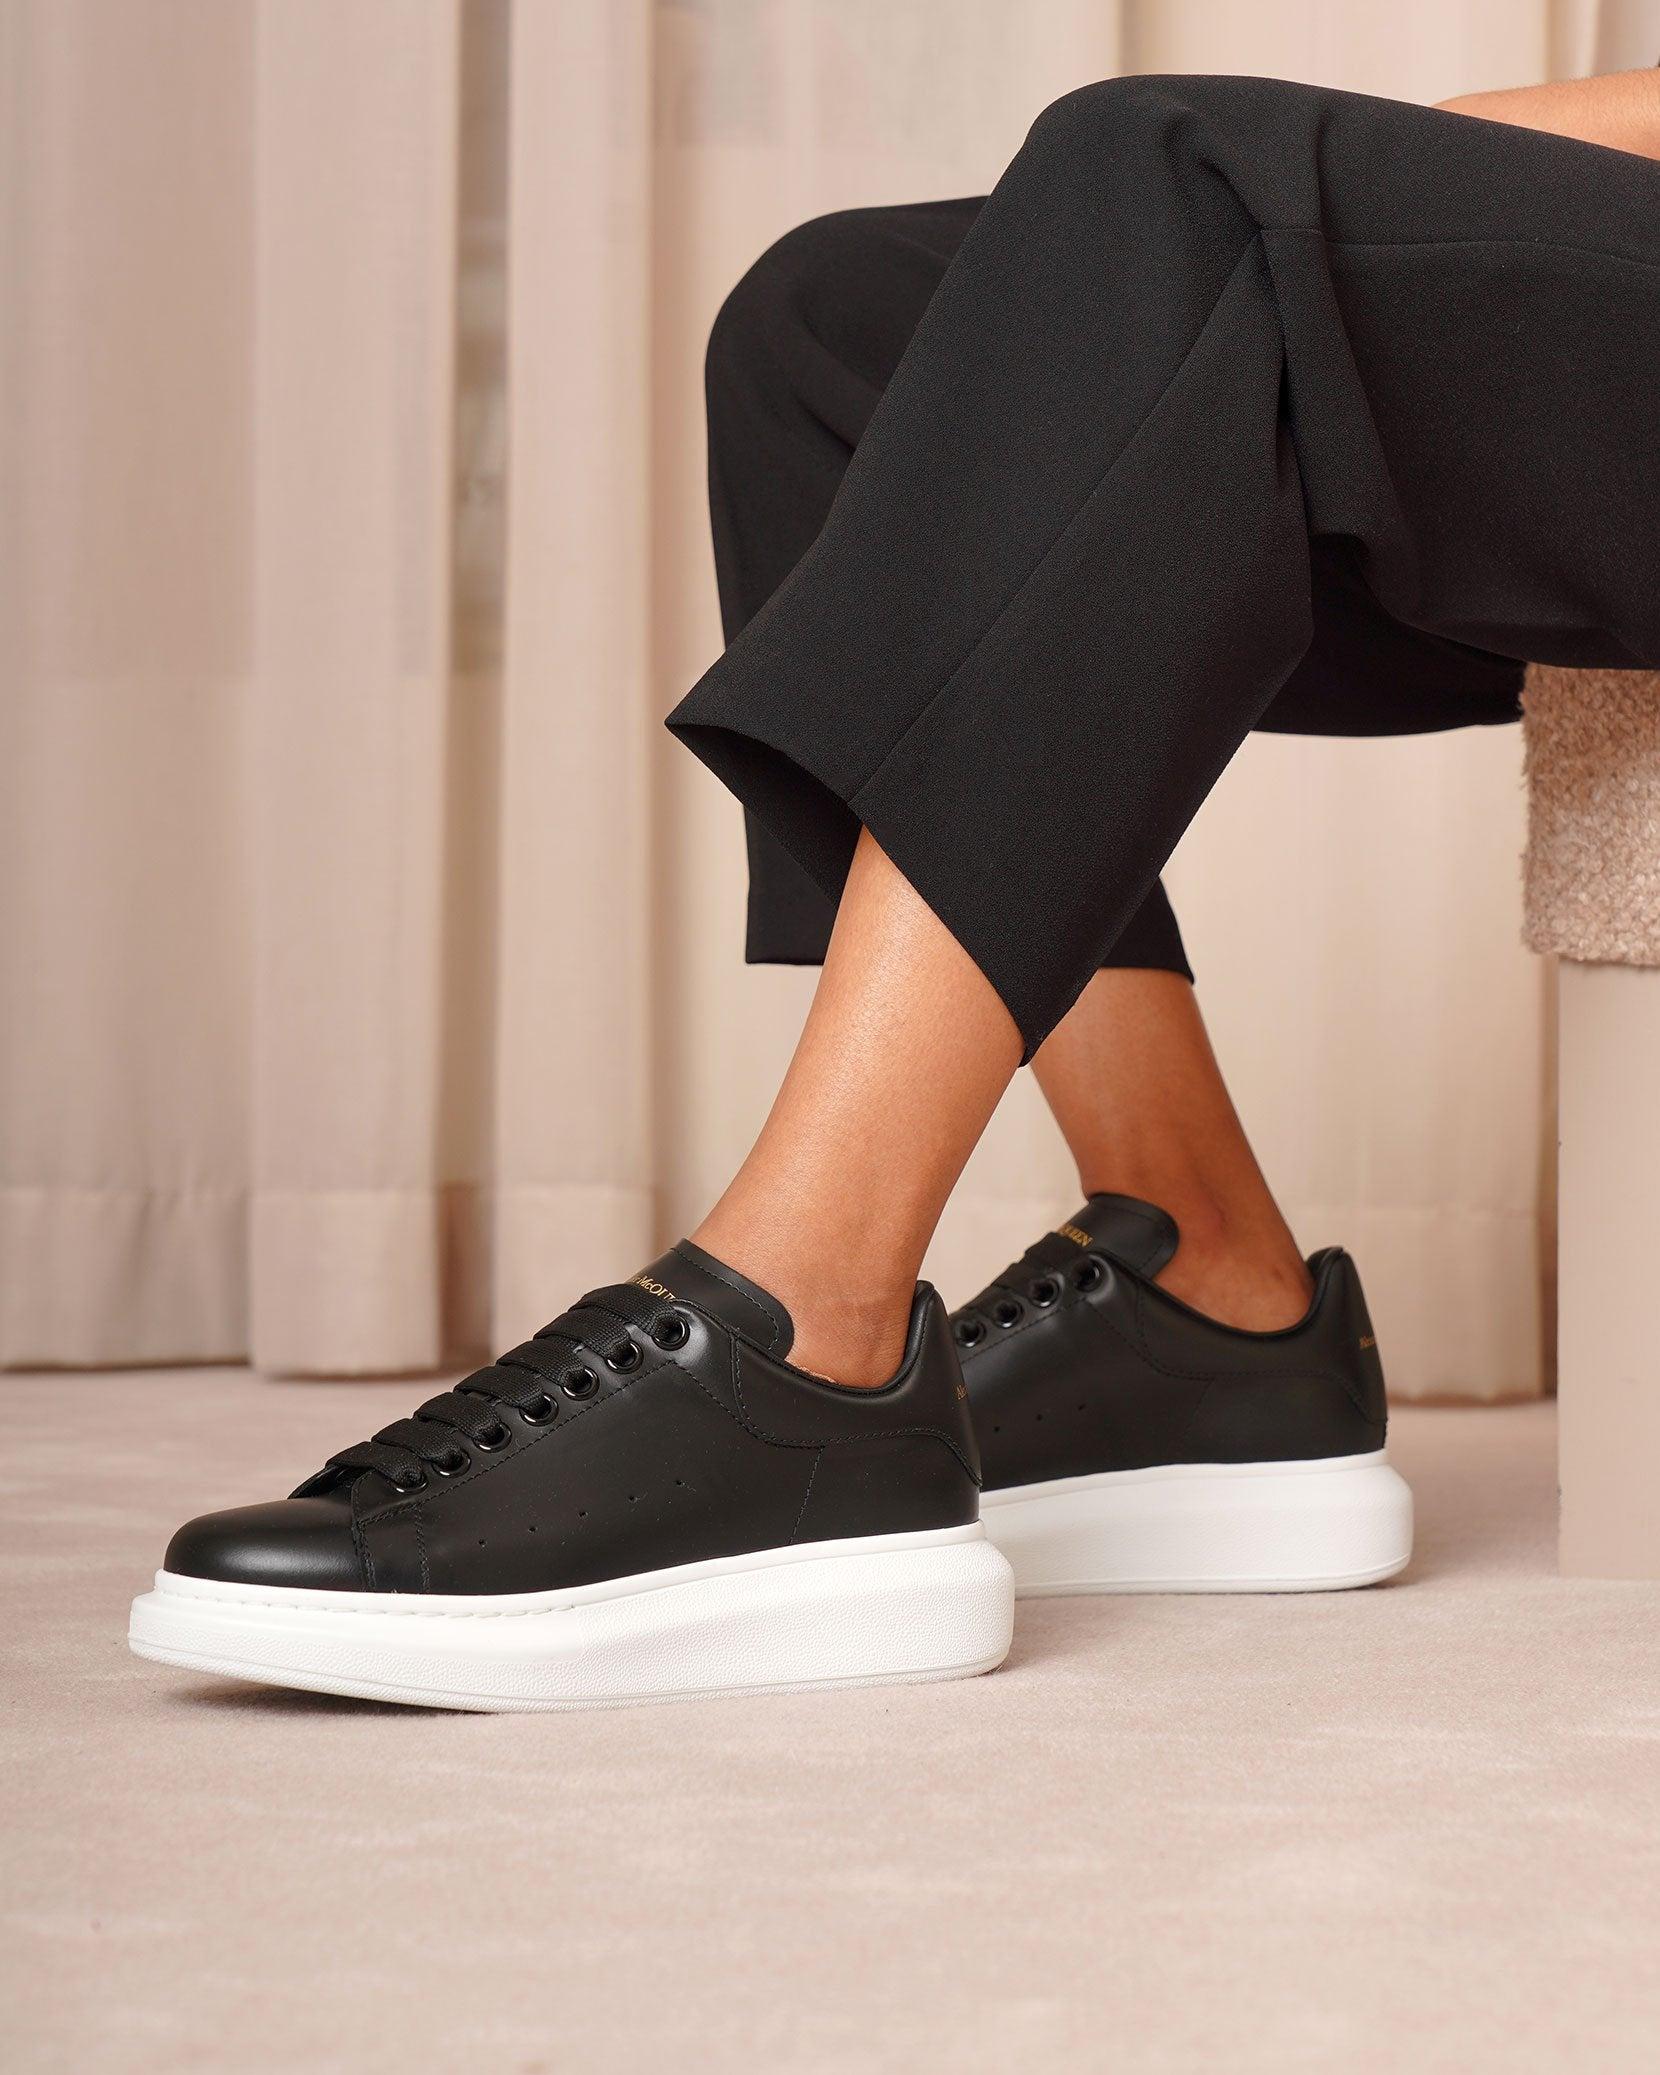 Alexander McQueen Leather Sneakers Black - Save 20% - Lyst